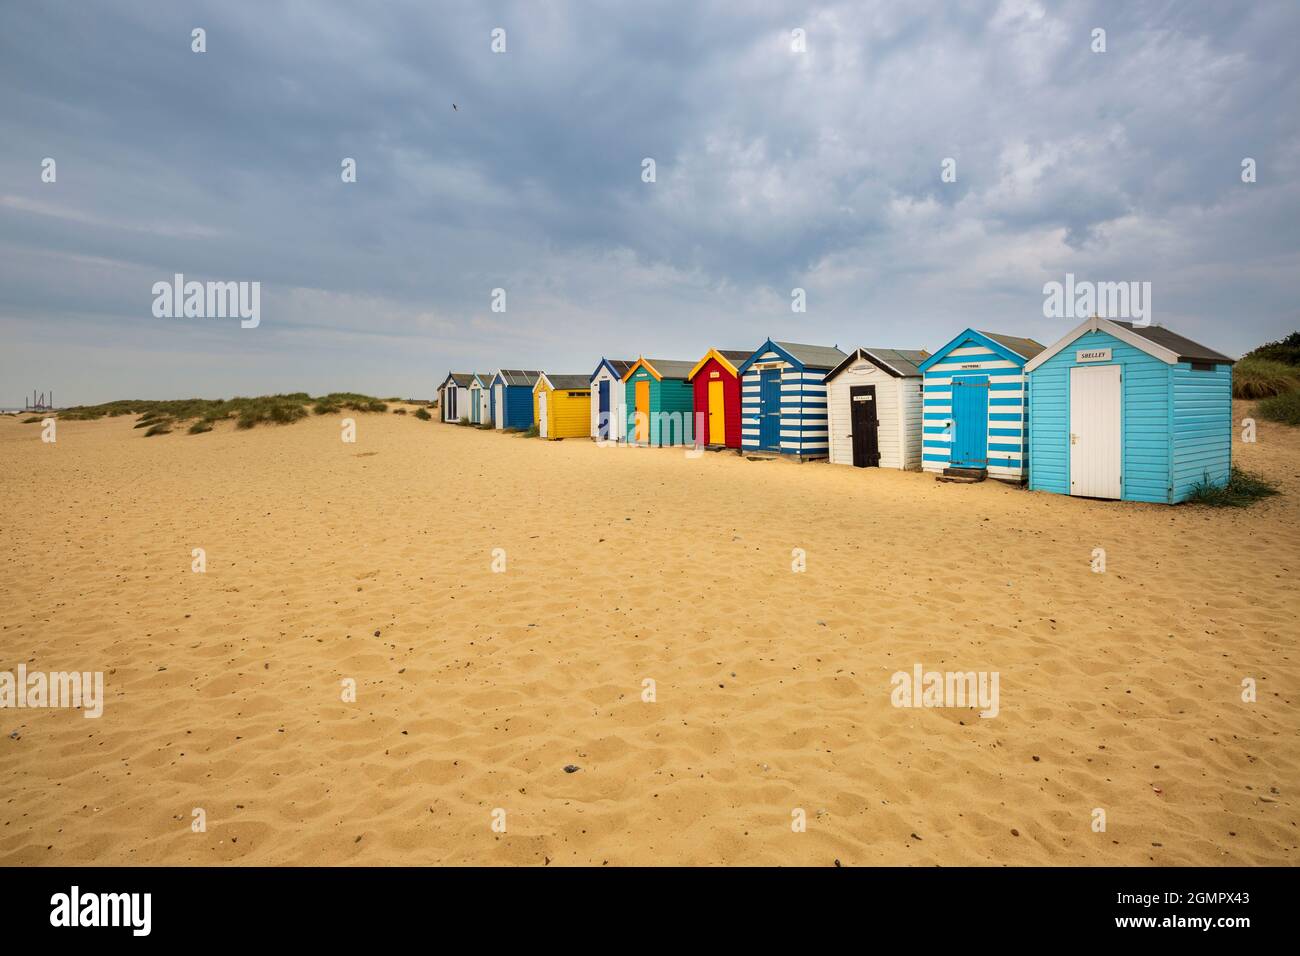 Colourful beach huts among the sand dunes at Southwold, Suffolk, England Stock Photo